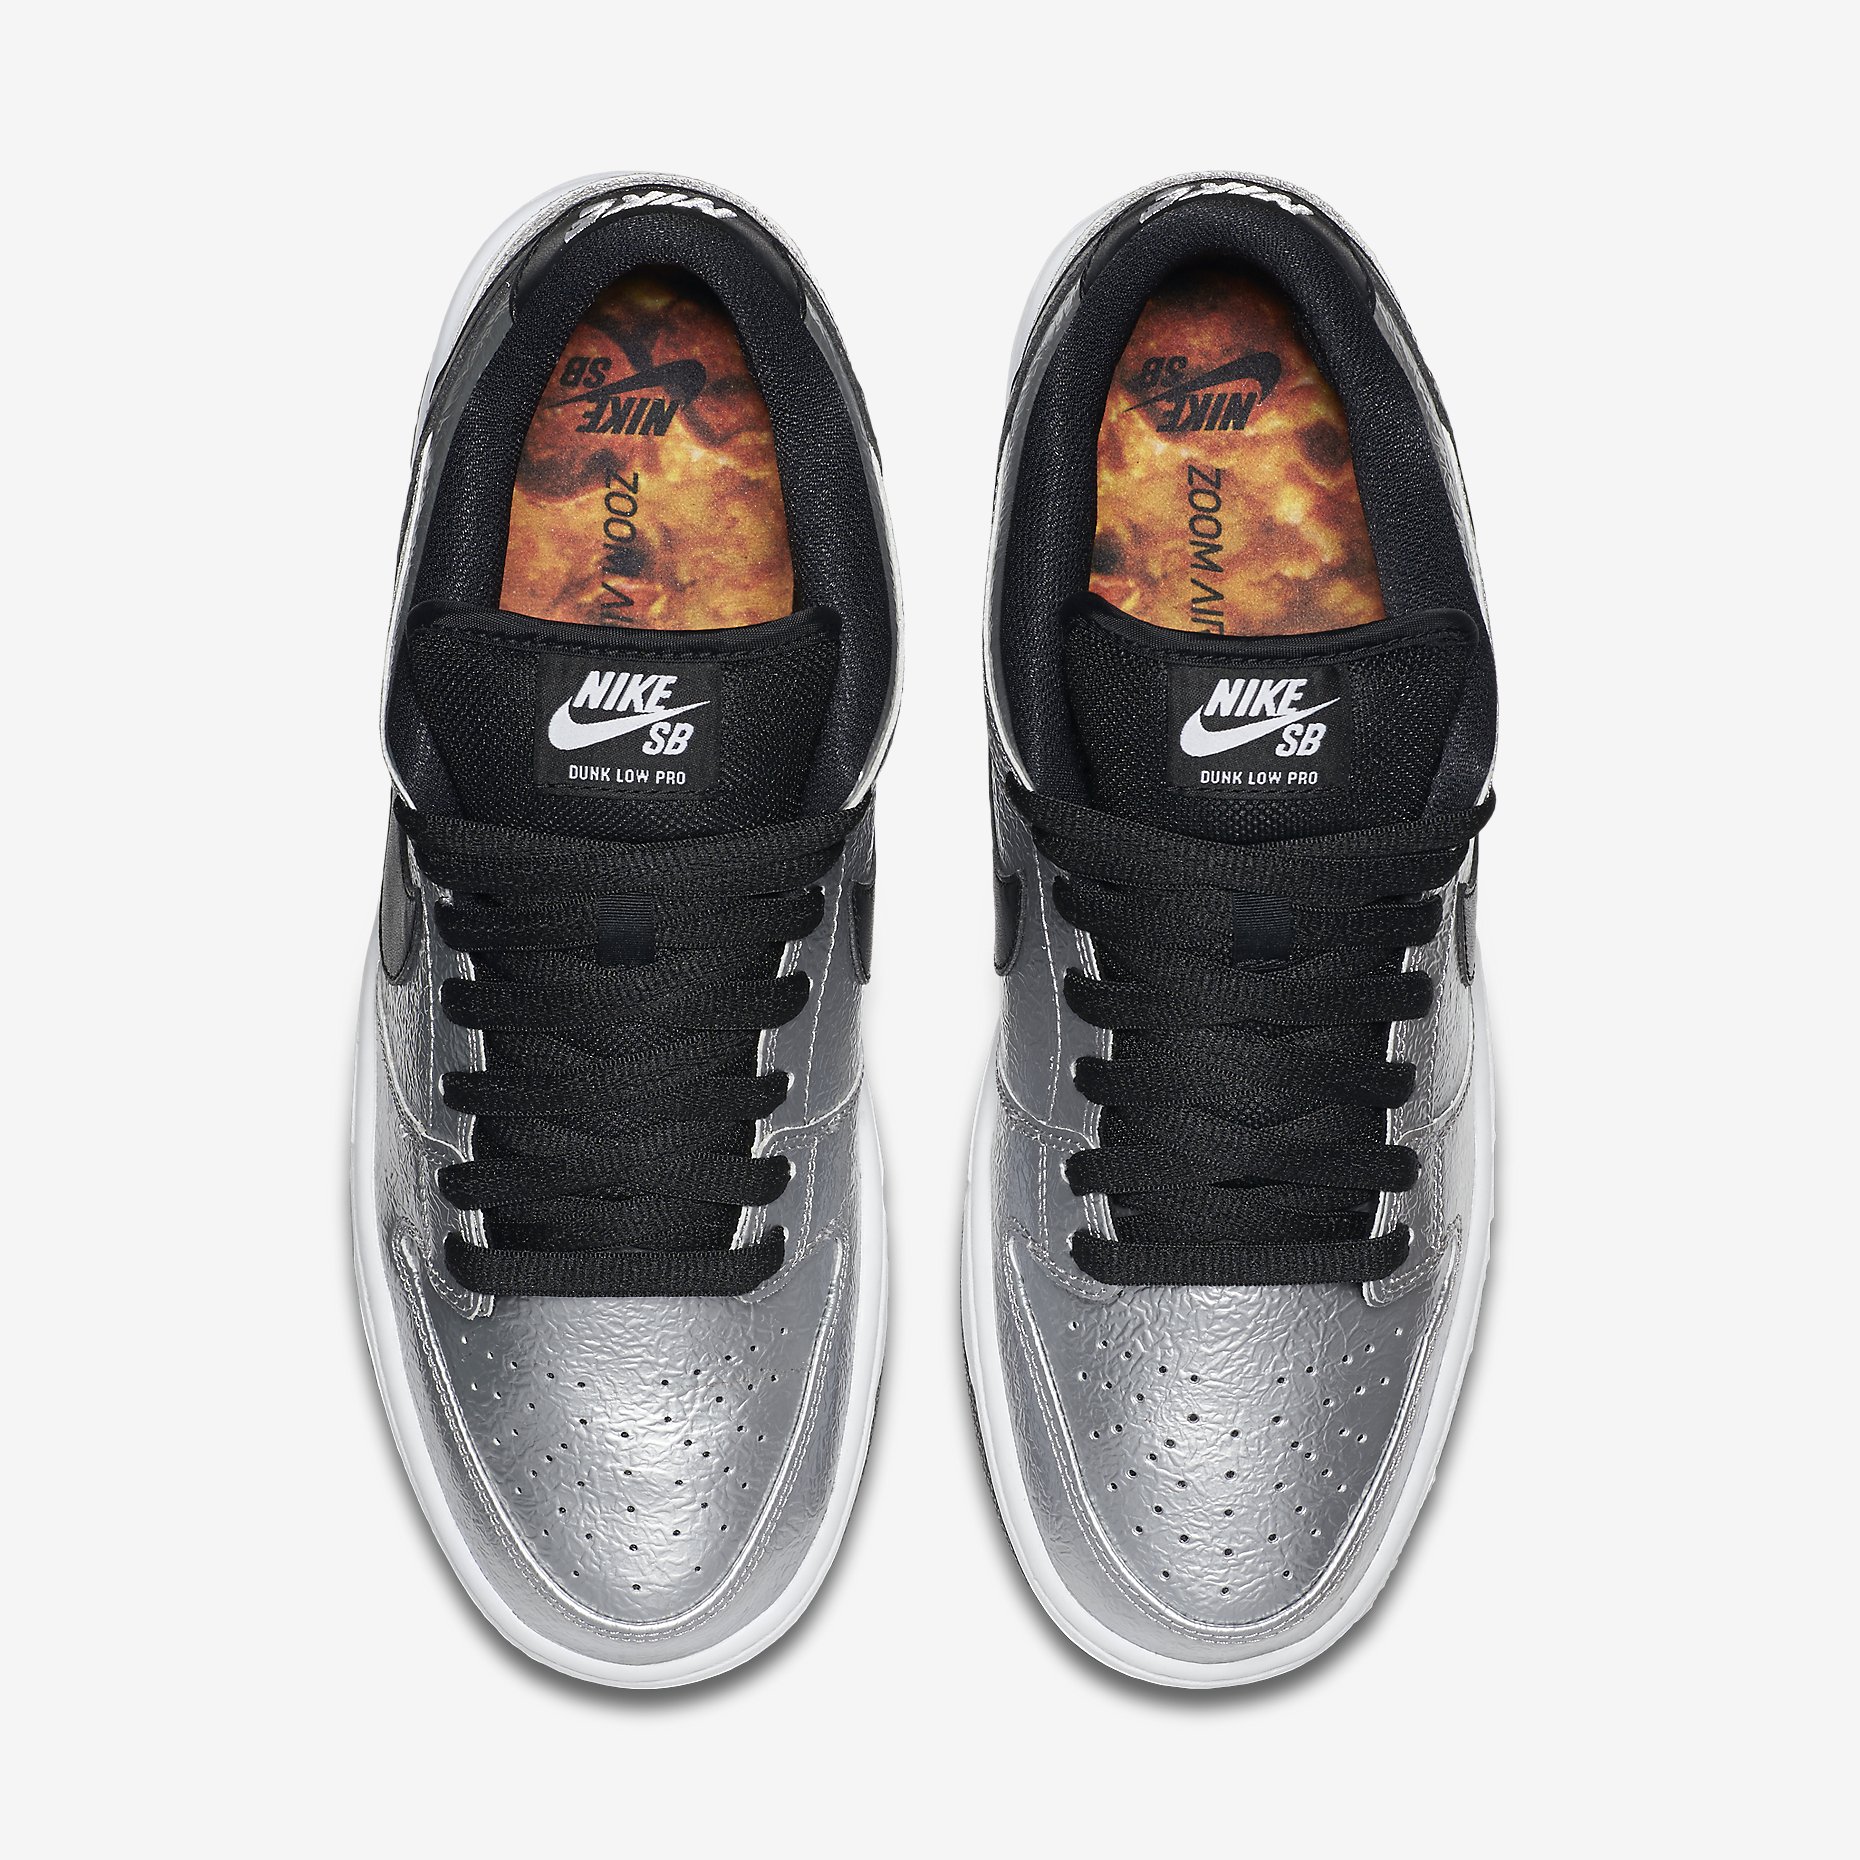 nike sb dunk low cold pizza